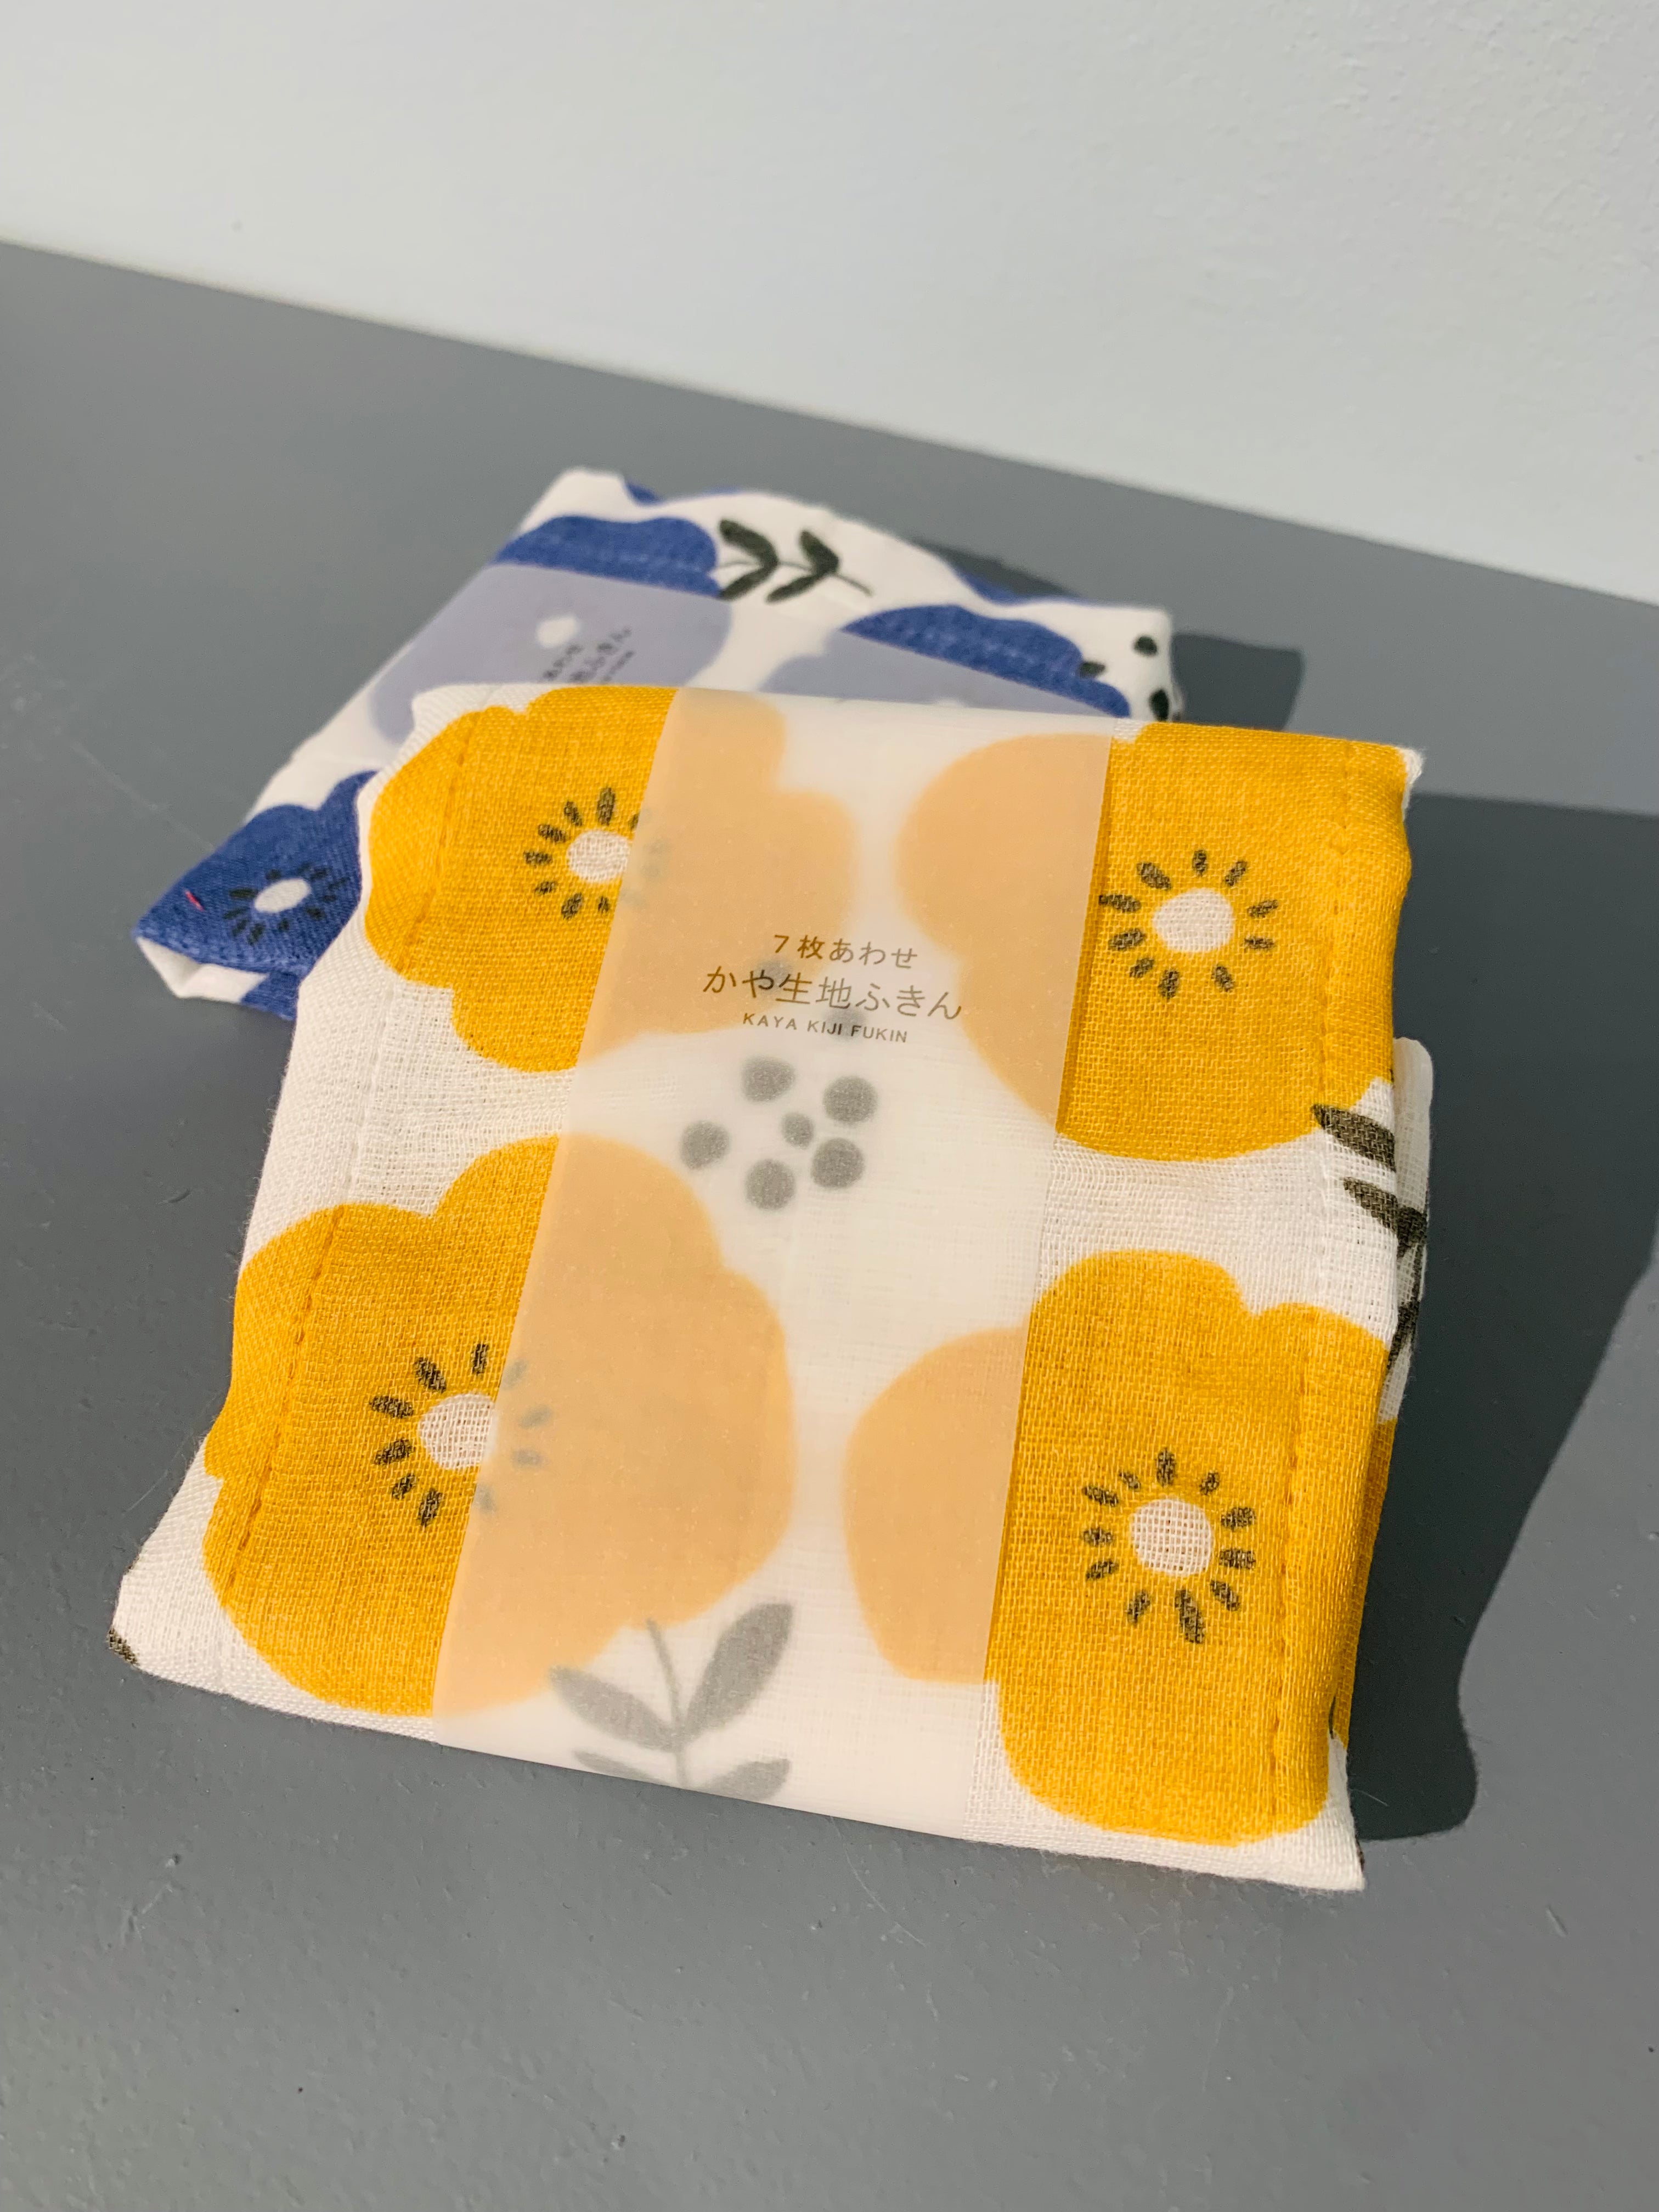 Japanese tea towel with flowers, yellow